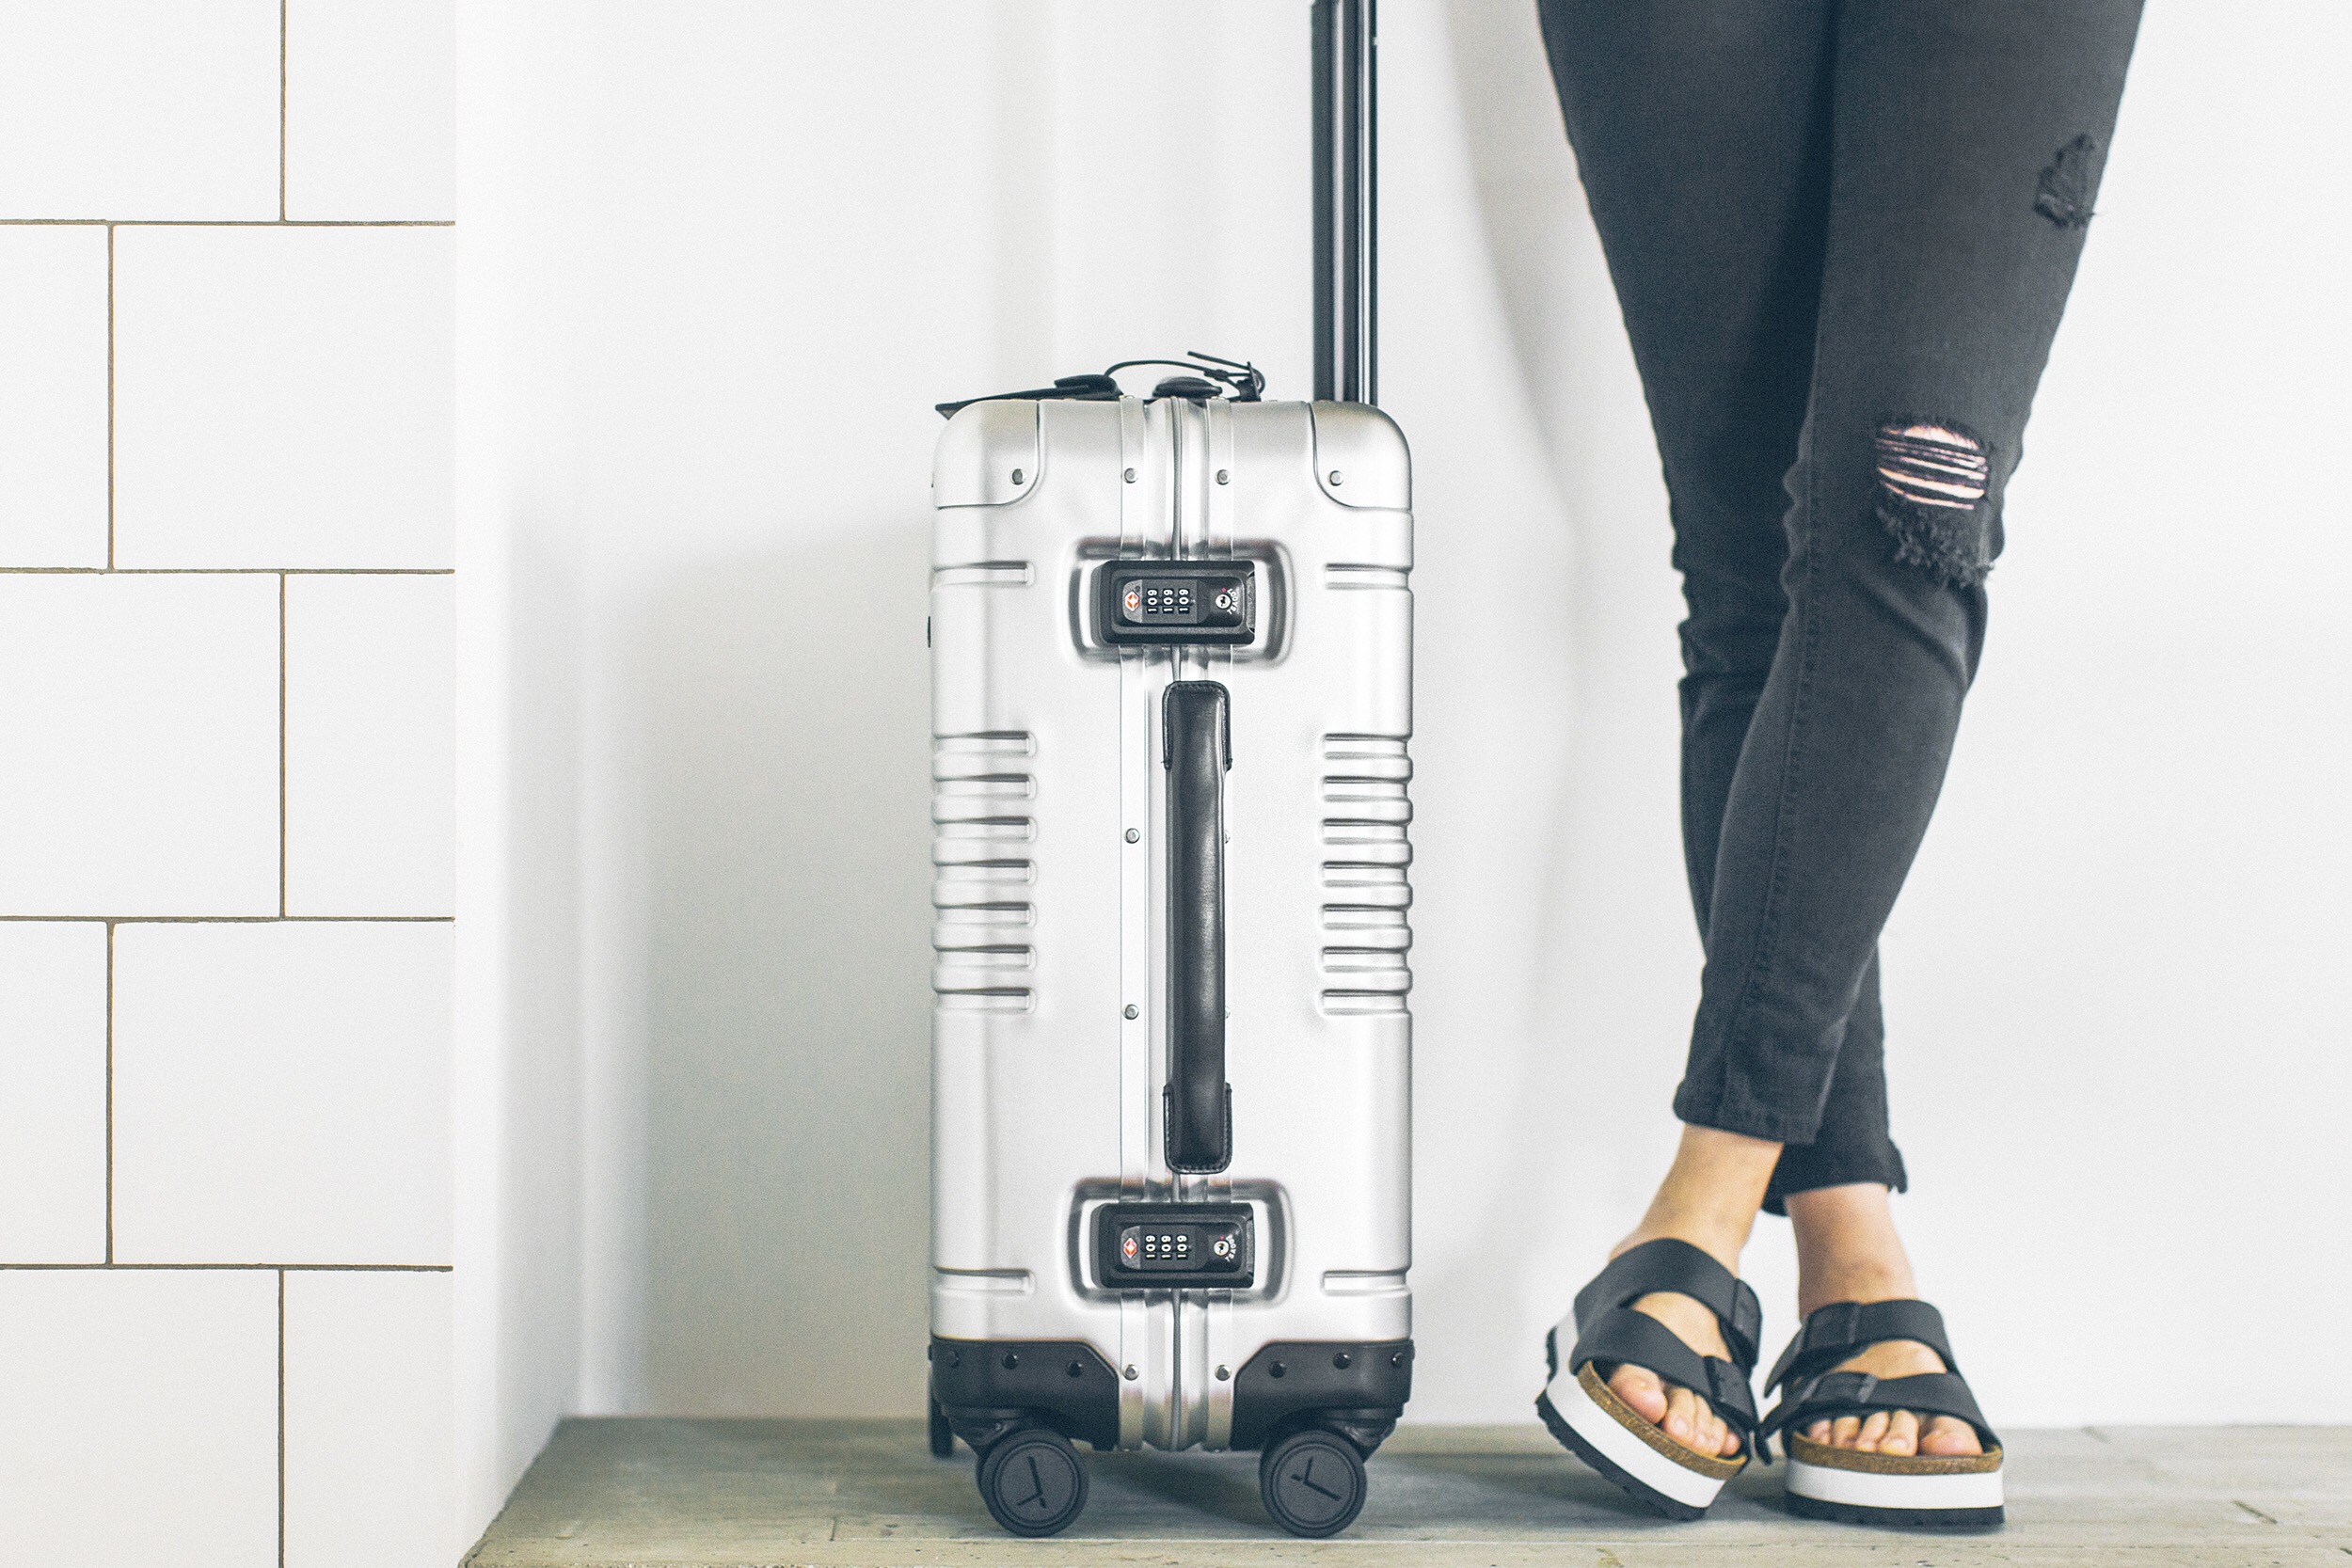 Best travel essentials: Here are 15 must-have items and